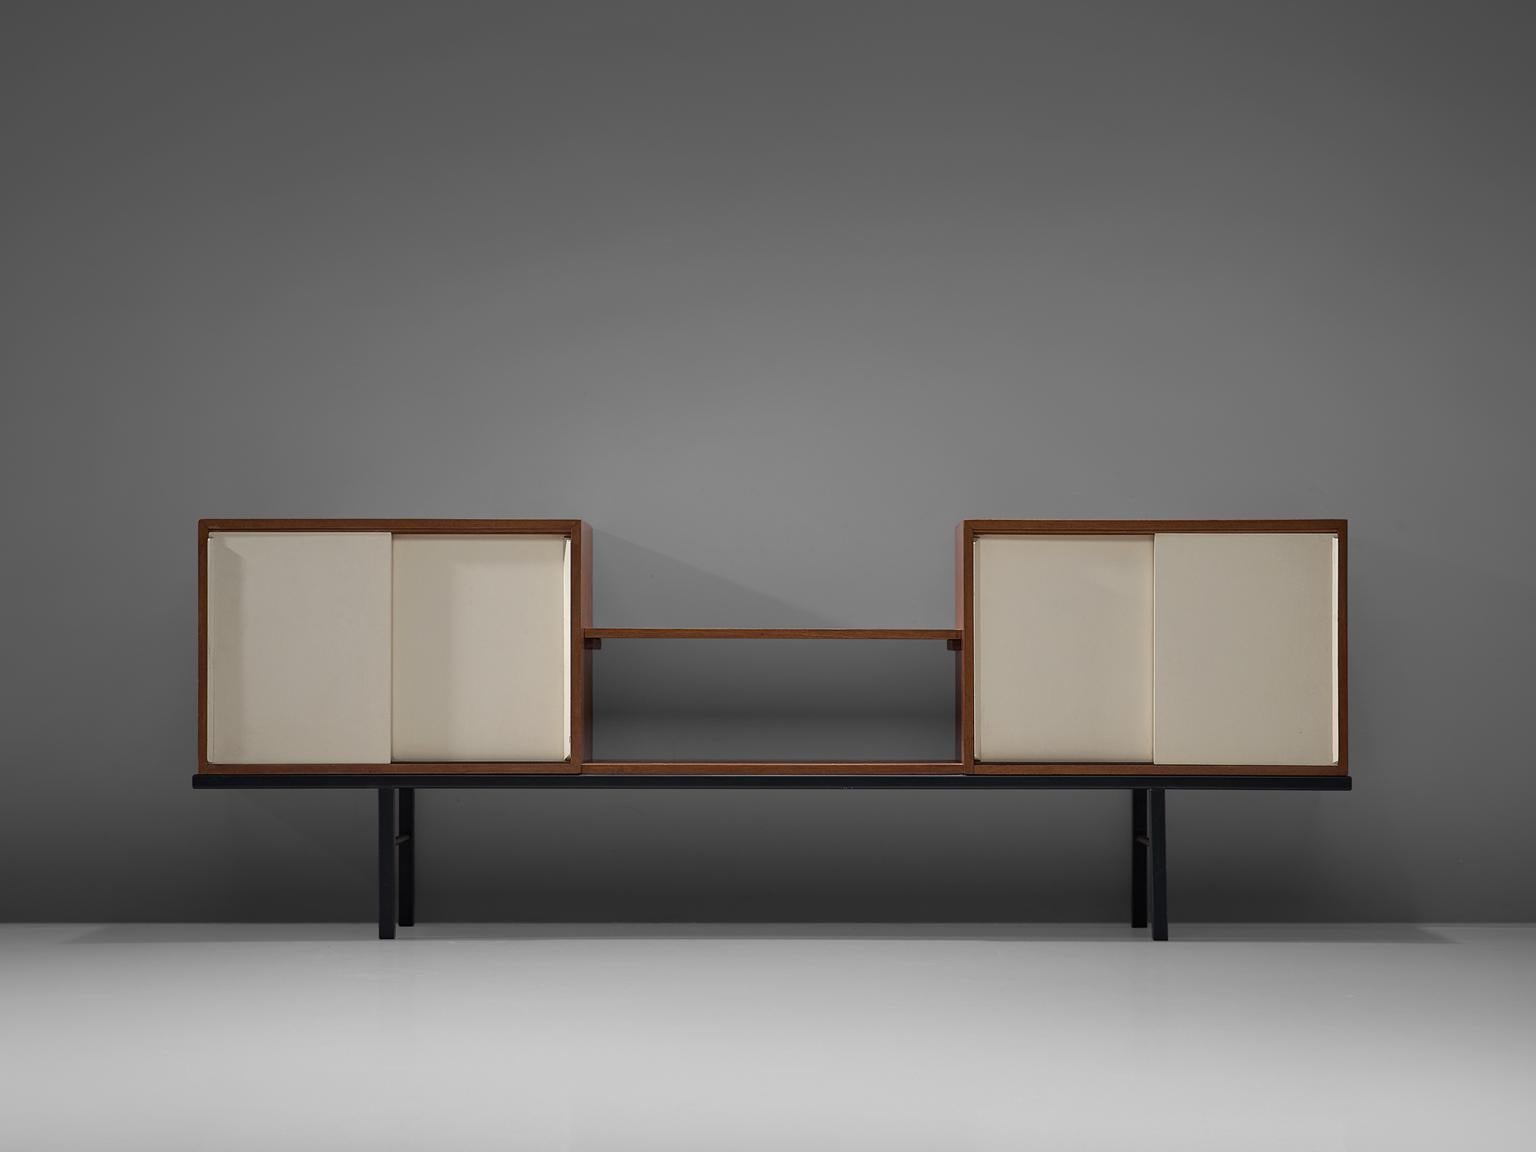 Martin Visser for 't Spectrum, pair of sideboards, Bornholm collection KW63, wood, metal, glass, The Netherlands, 1956-1959

This rare sideboard is executed in mixed materials. The credenza features a Minimalist black metal base and two cabinets